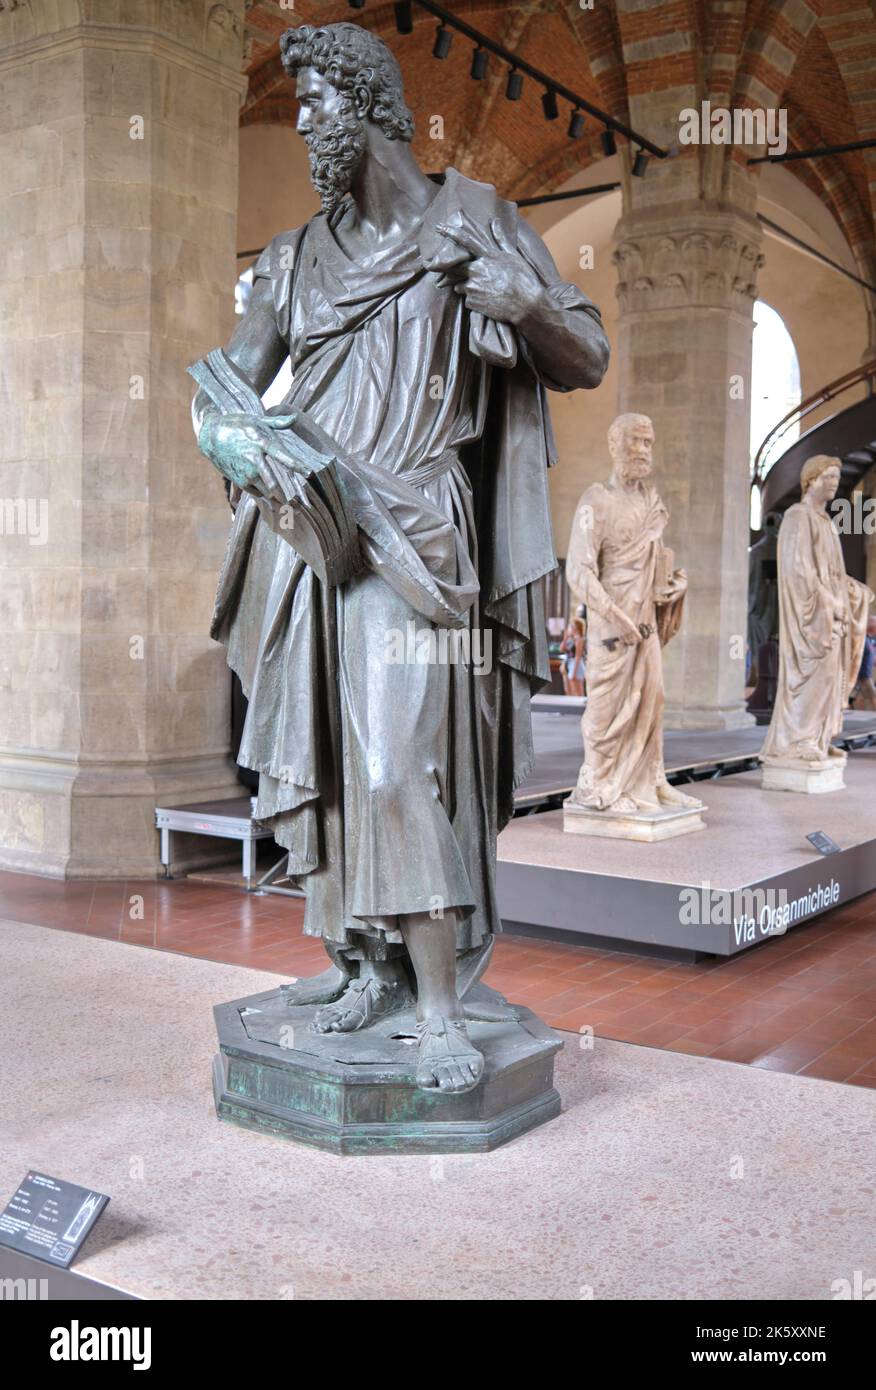 St Mark or San Marco by Donatello in the Museum of the Church of Orsanmichele Florence Italy Stock Photo